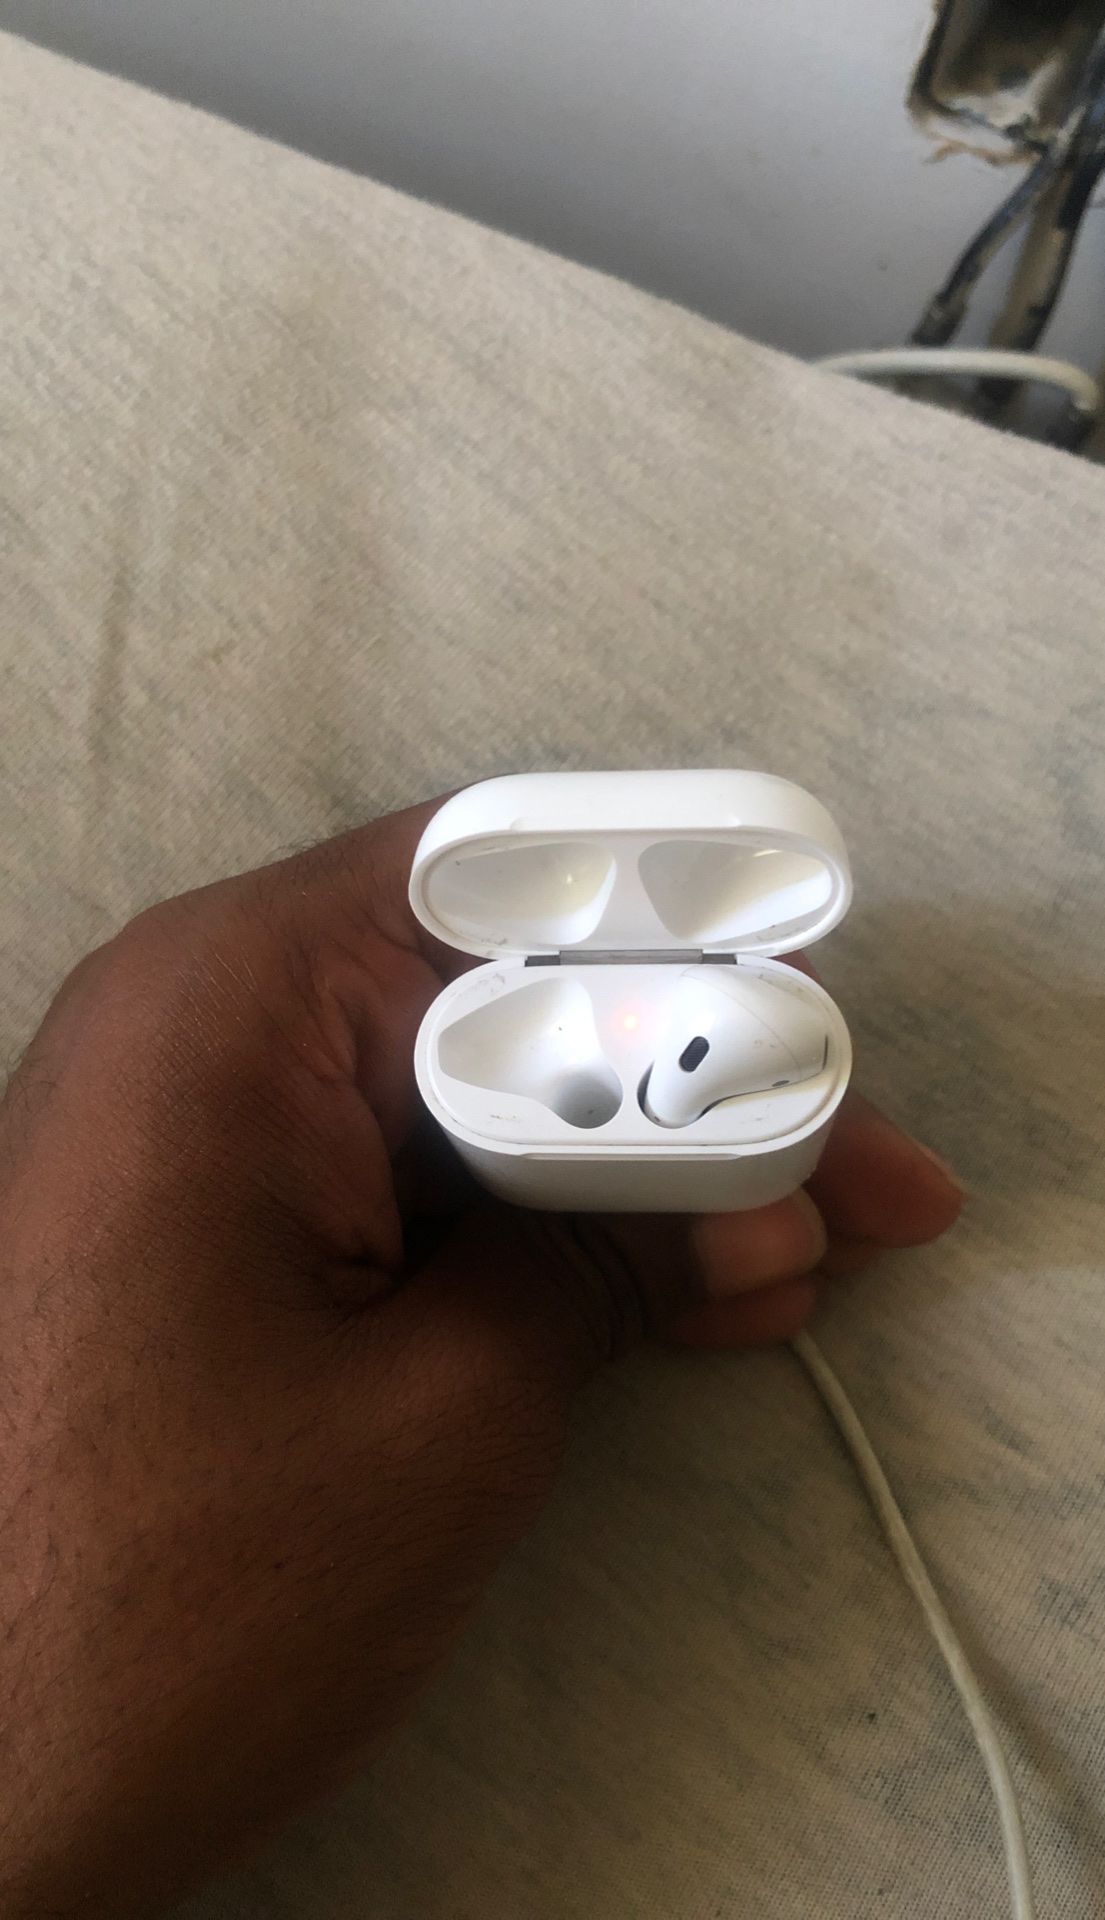 AirPods 1st generations